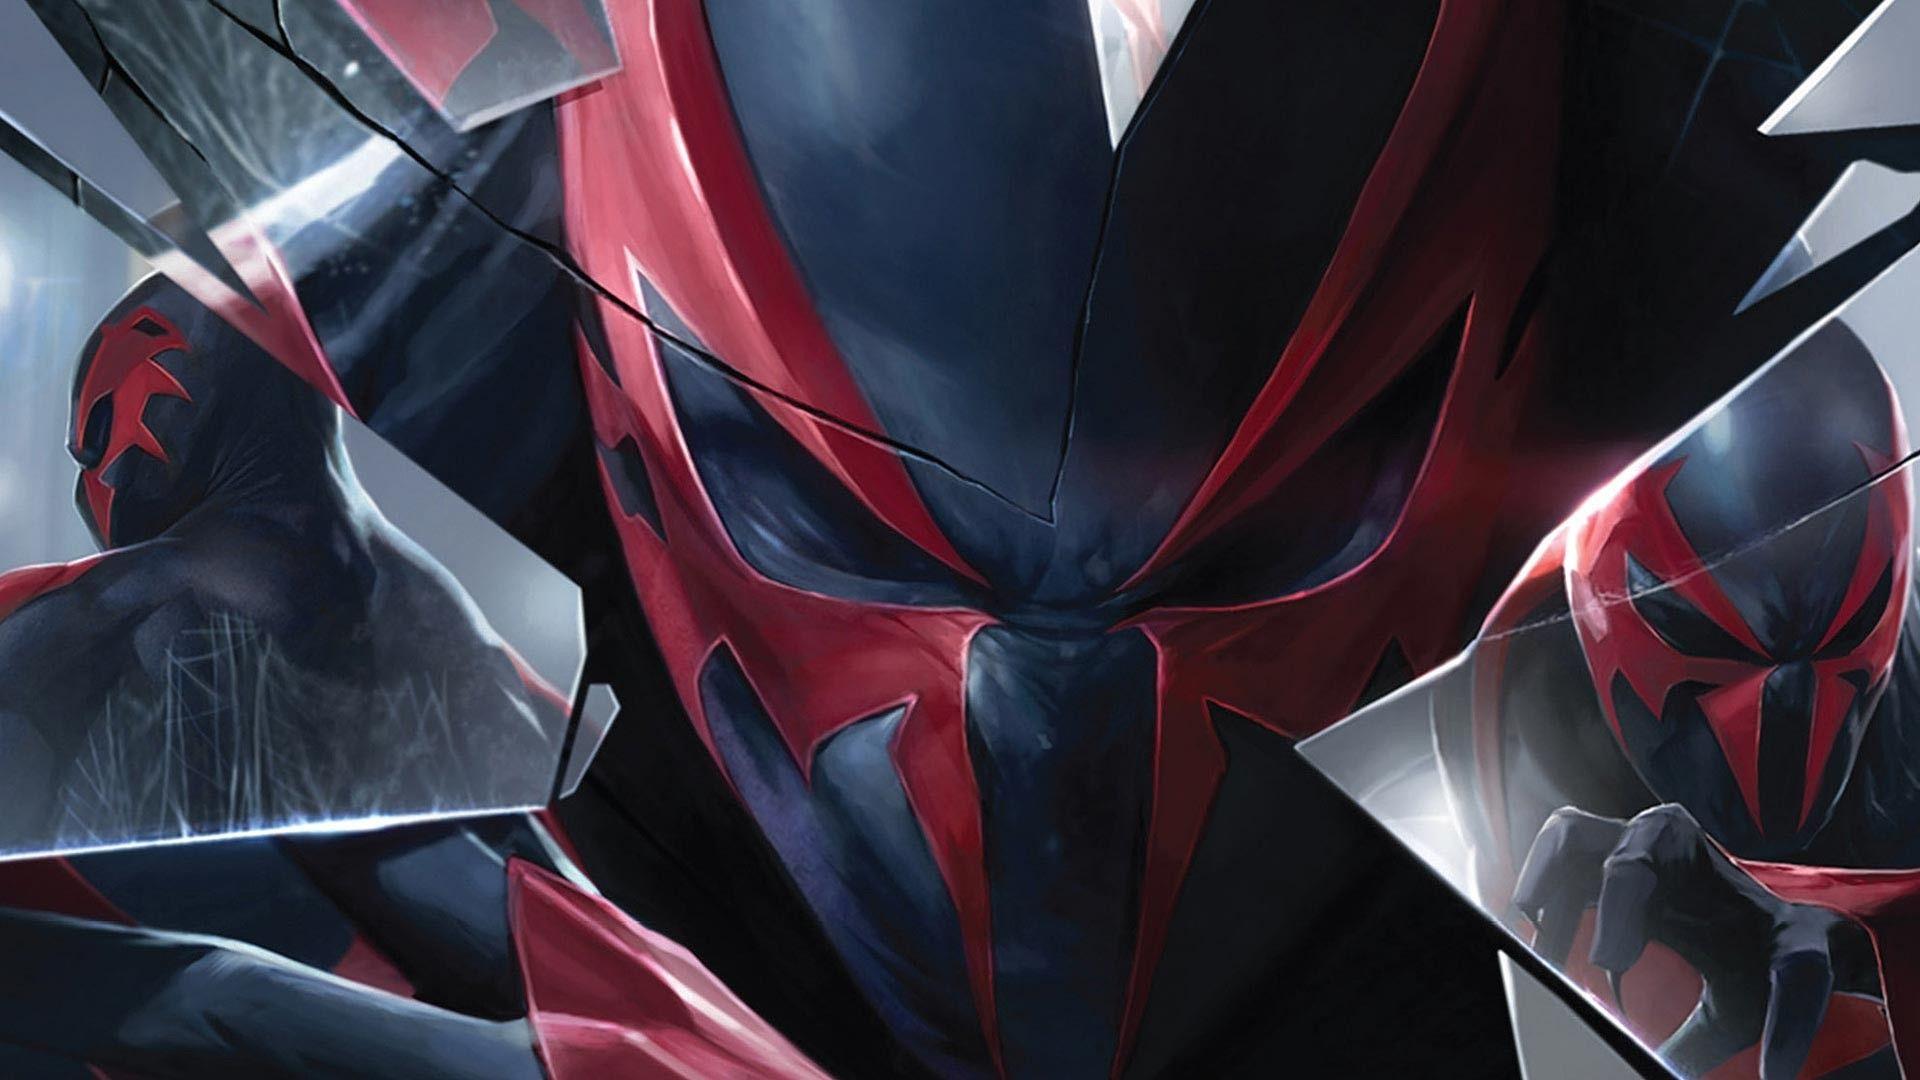 Tons of awesome spider man 2099 wallpapers free donlowd to download for fre...